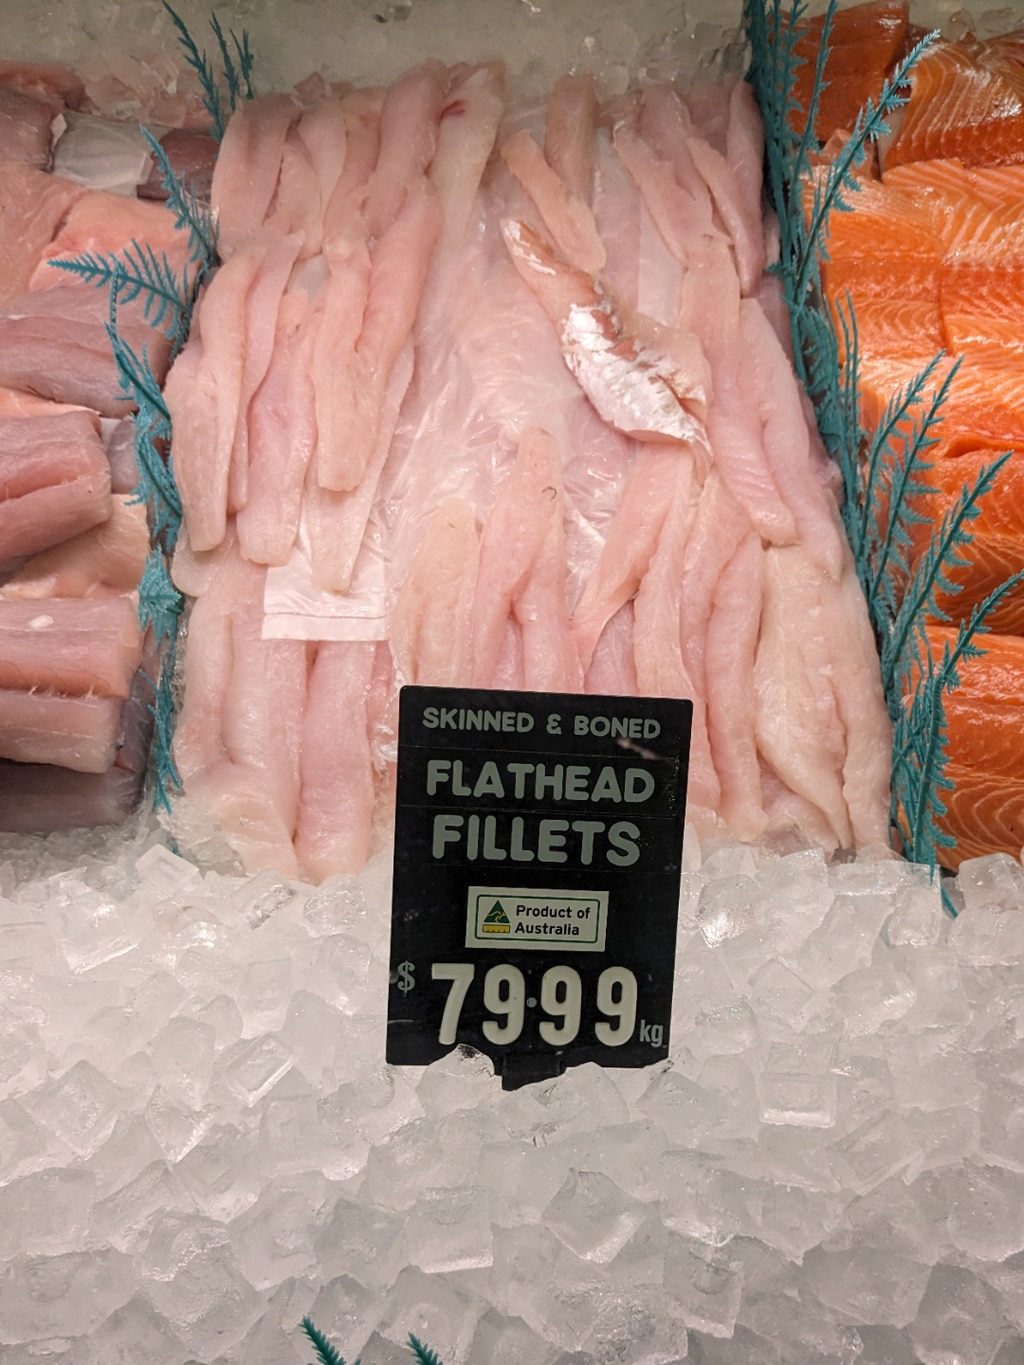 The eye-watering price of flathead fillets for sale at a regional NSW grocery store have come under fire when photos emerged online. Picture: Reddit